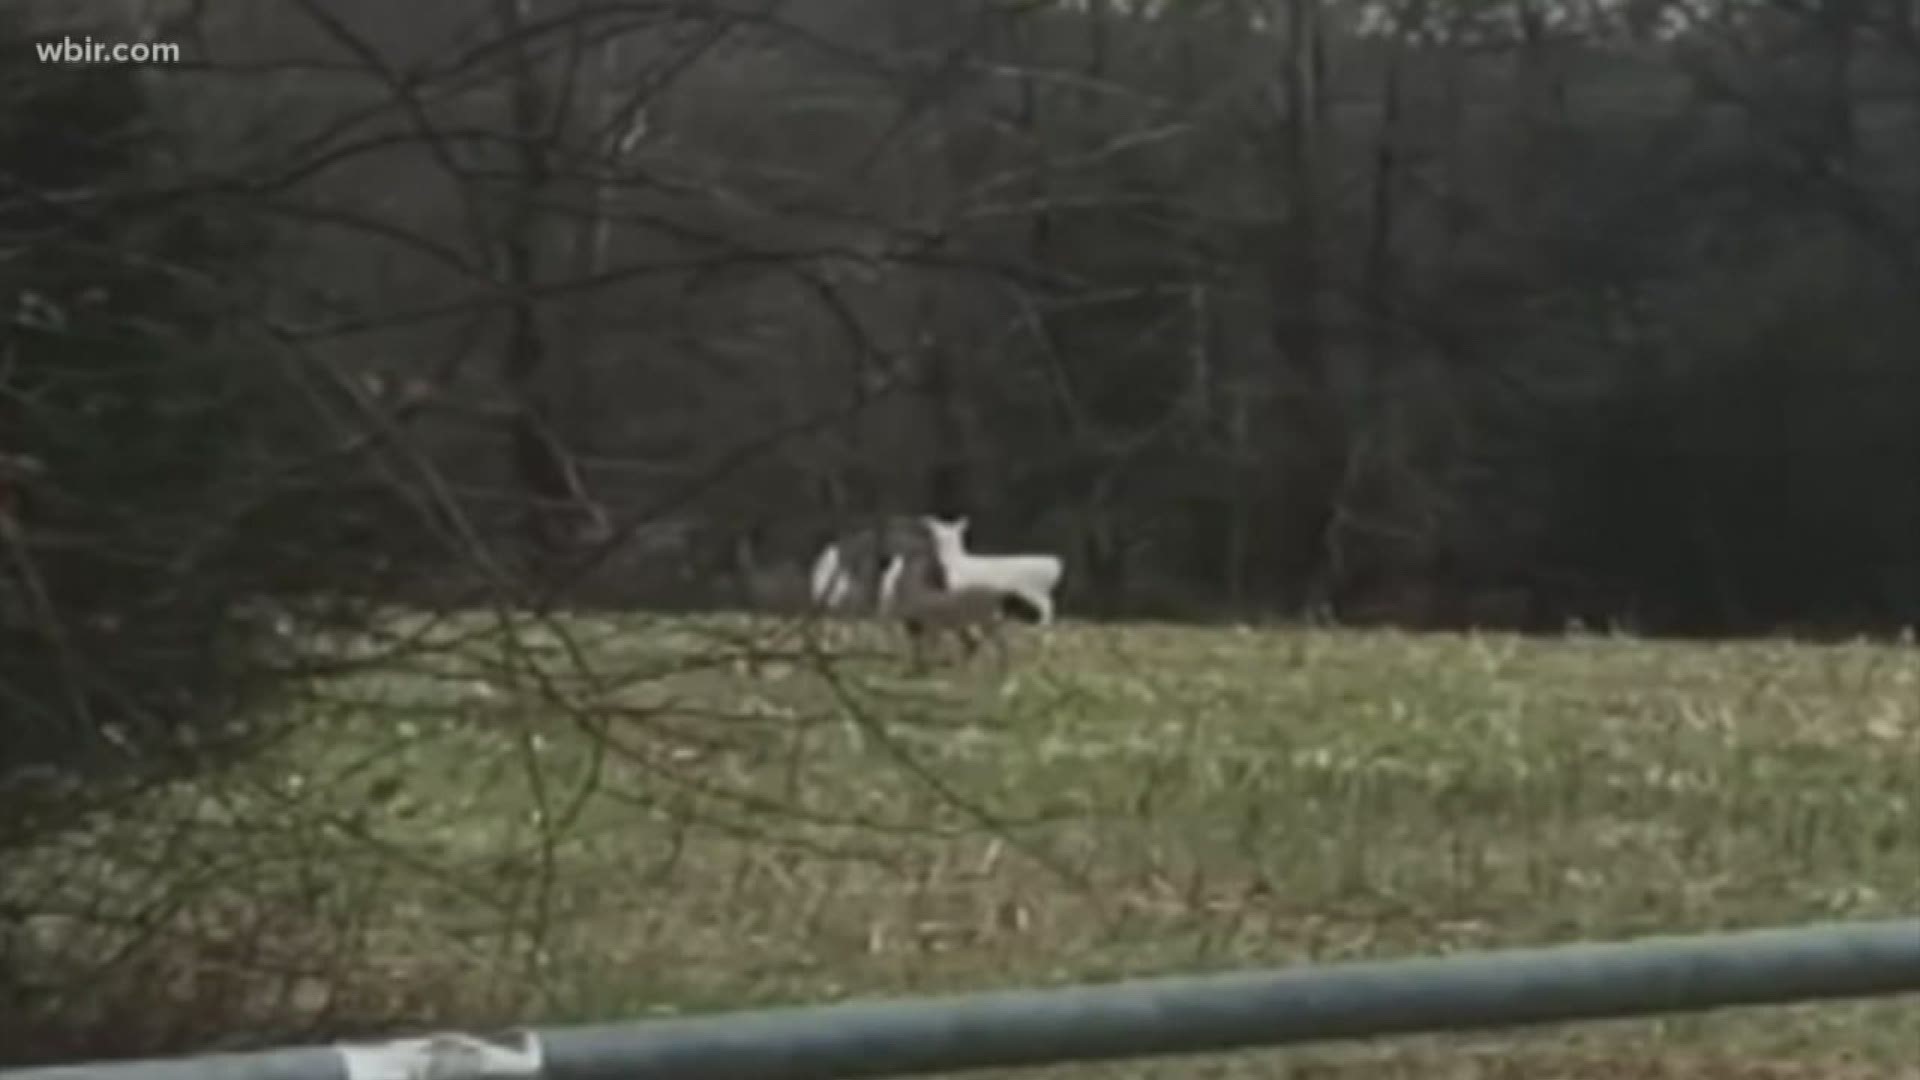 Albino deer have been spotted roaming in Middle Tennessee.